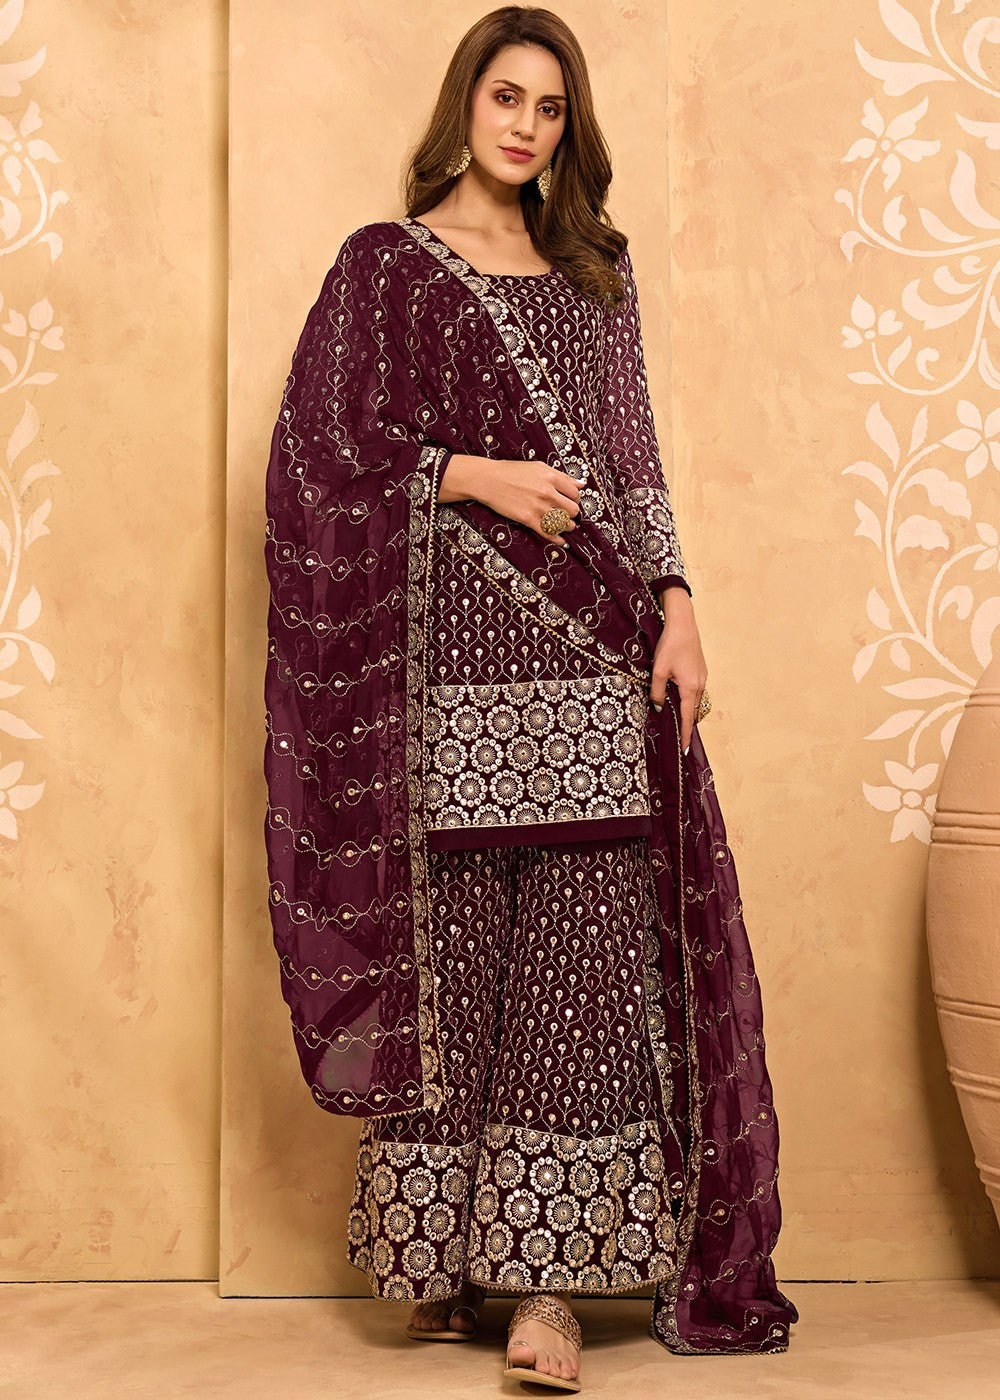 Buy Wine Maroon Party Style Suit - Designer Sharara Suit